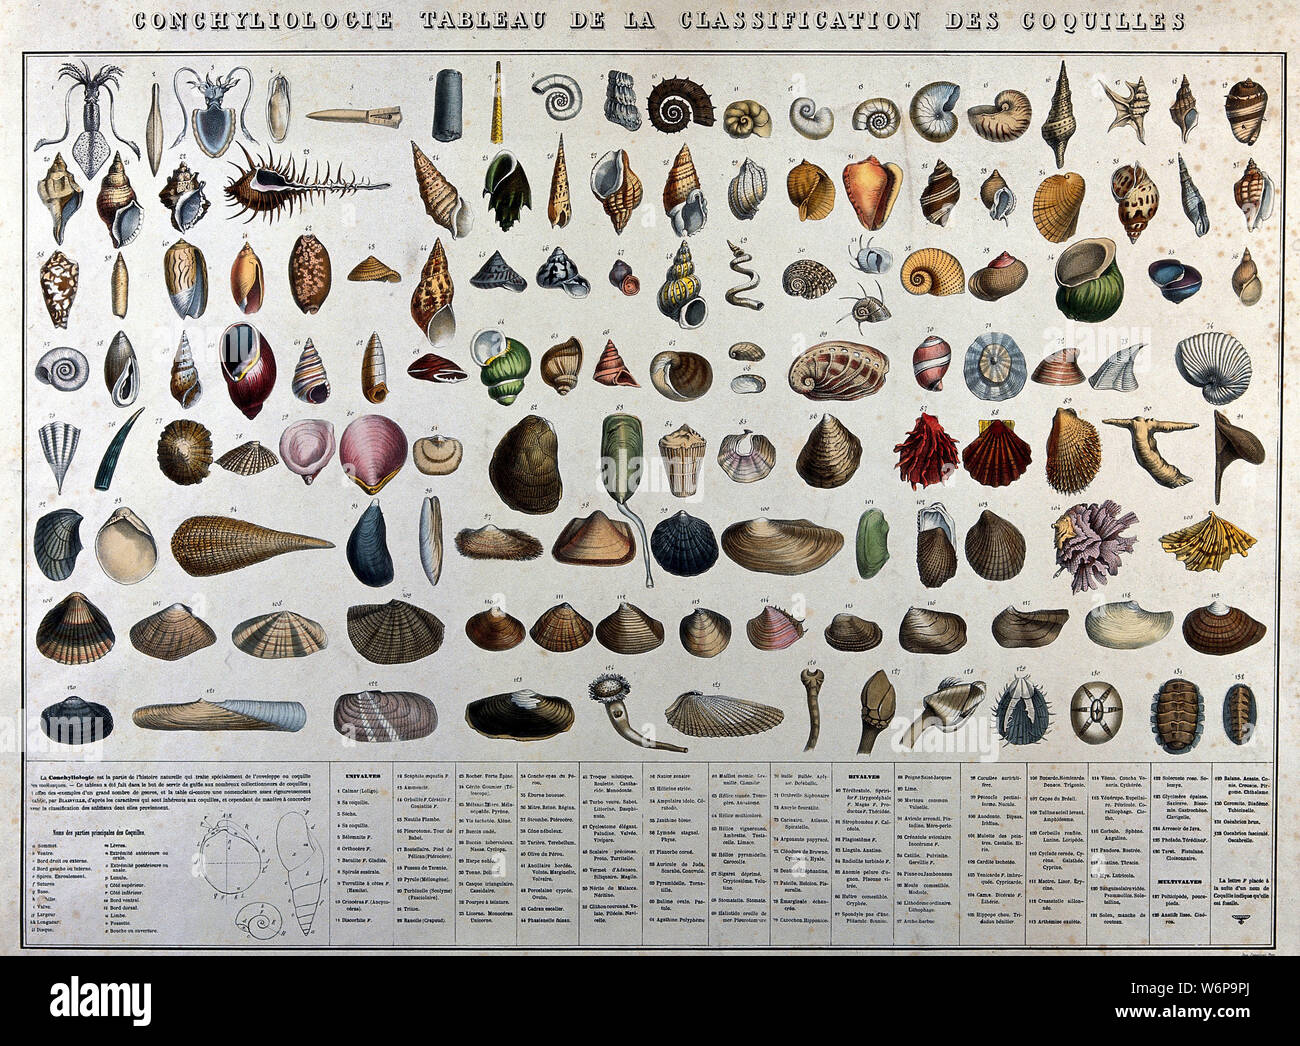 Fossil Classification Chart